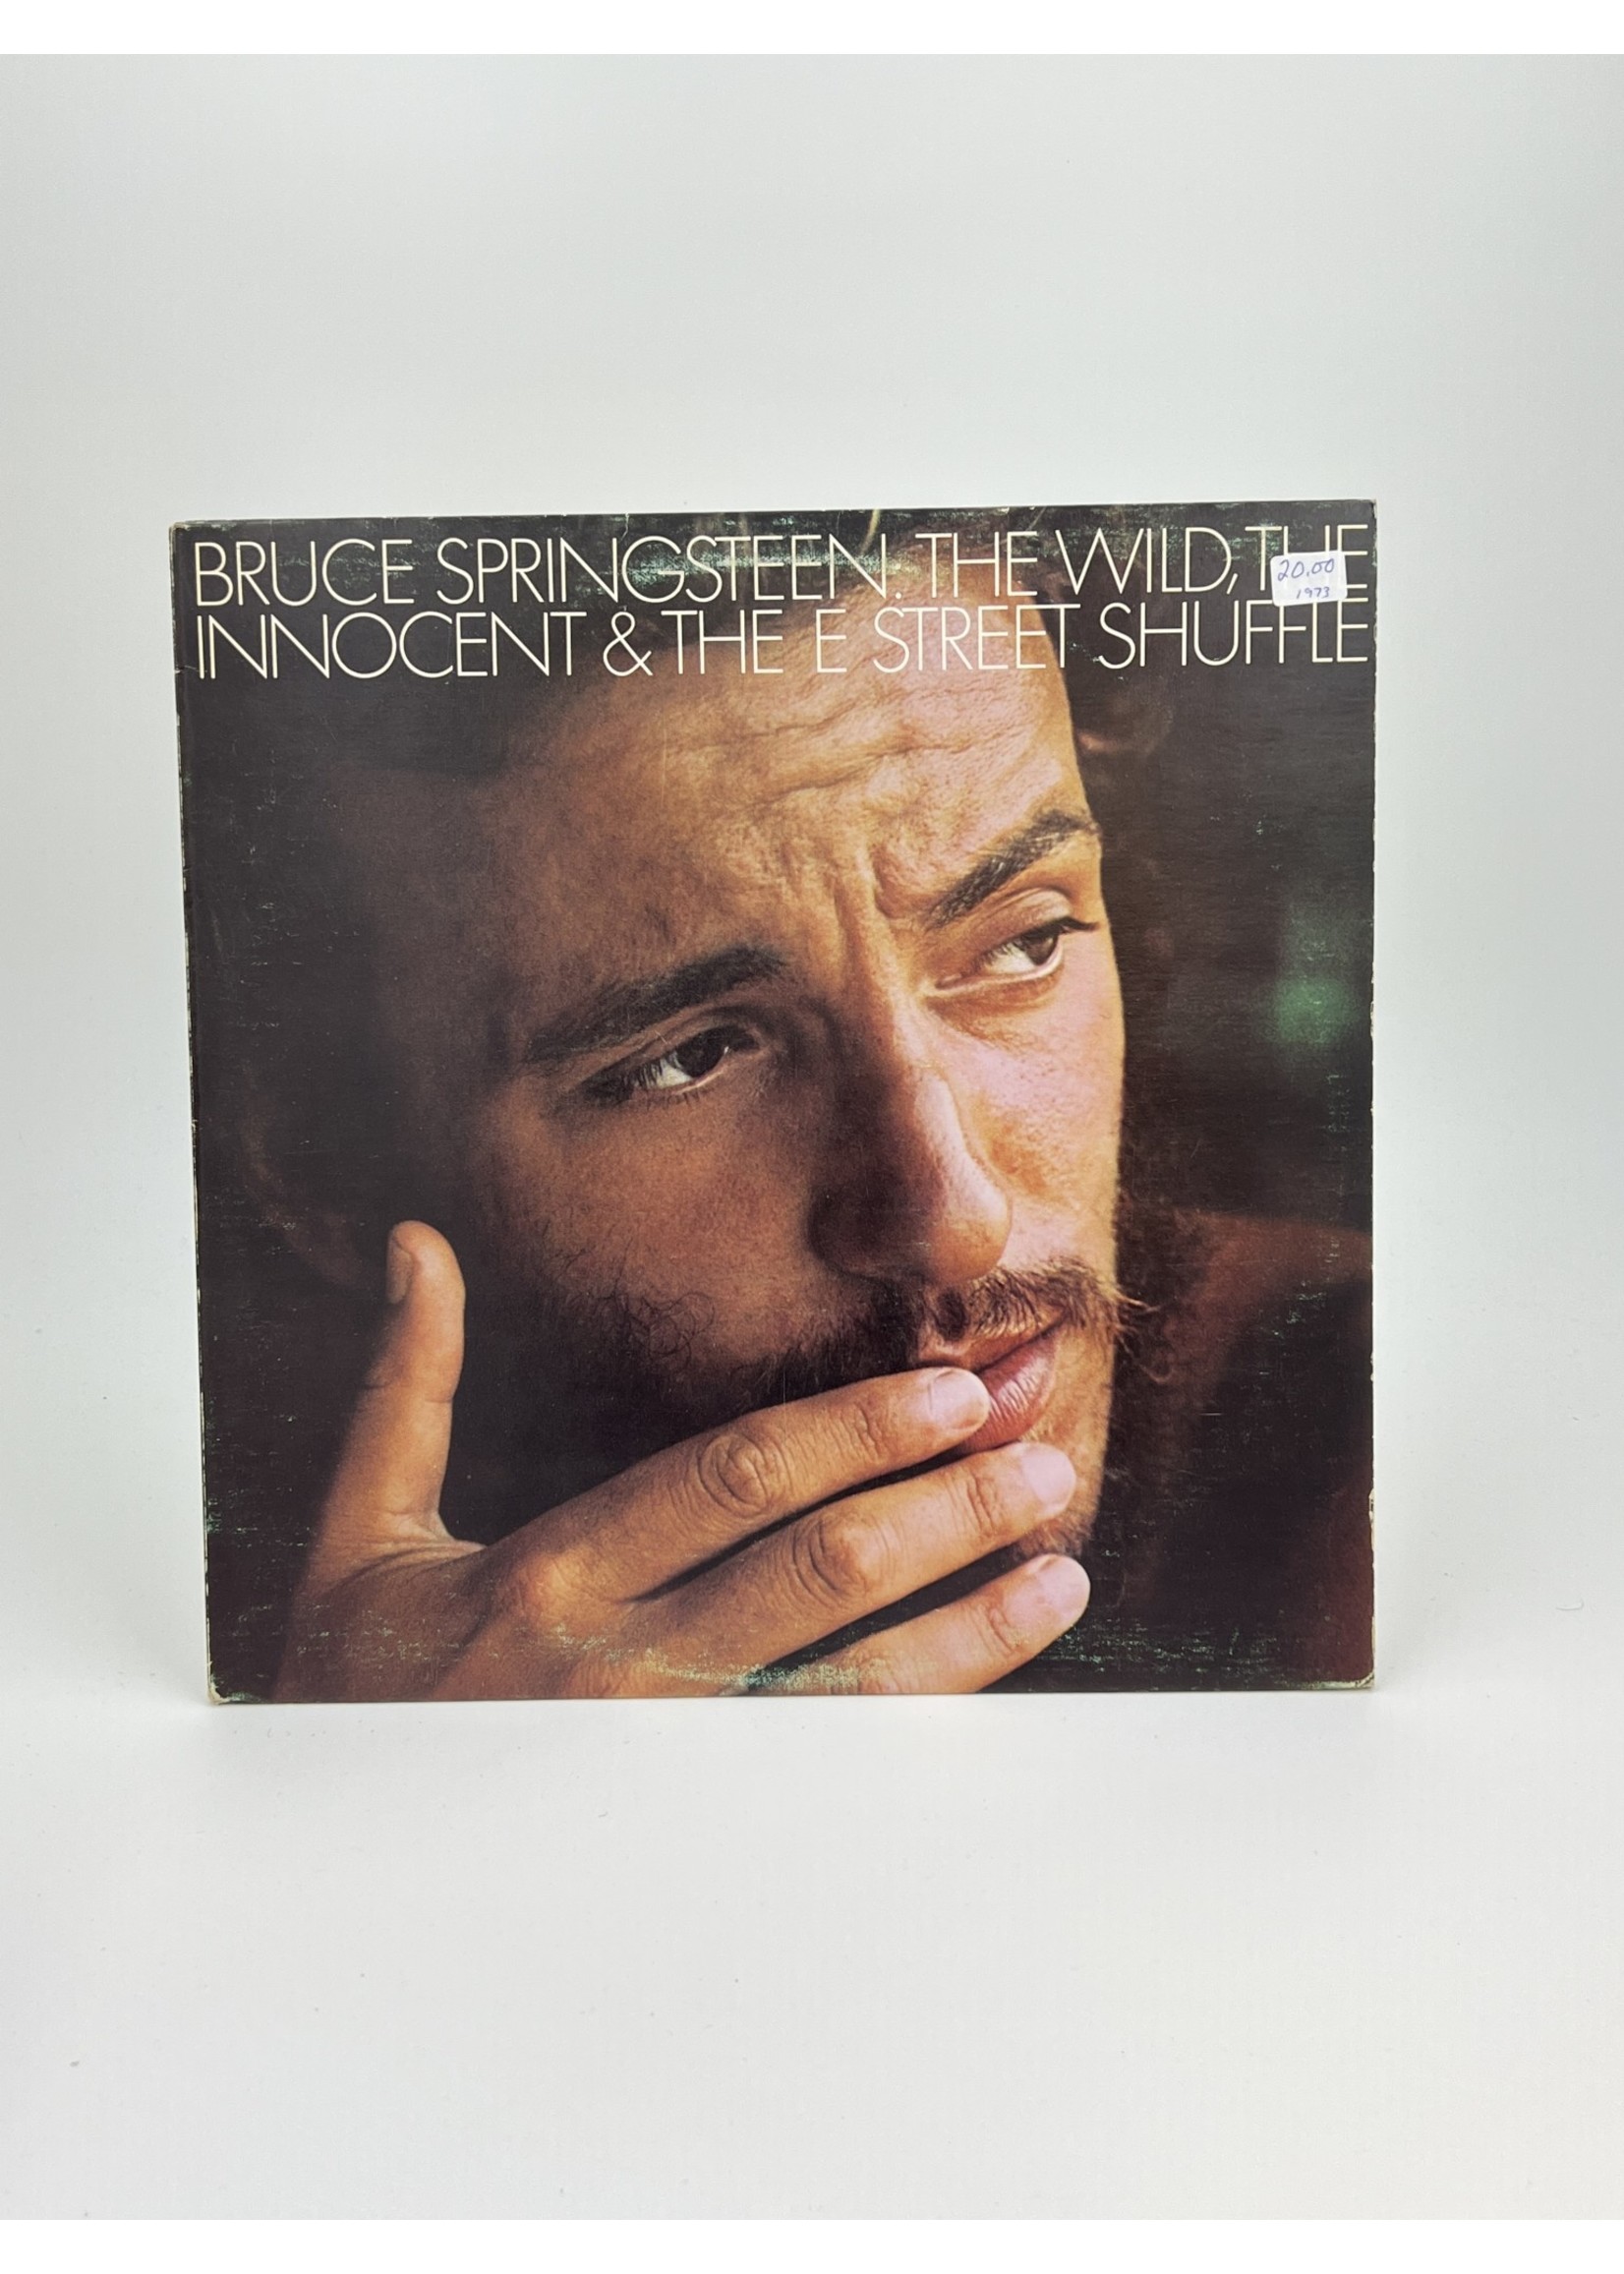 LP Bruce Springsteen The Wild The Innocent and The E Street Shuffle LP Record